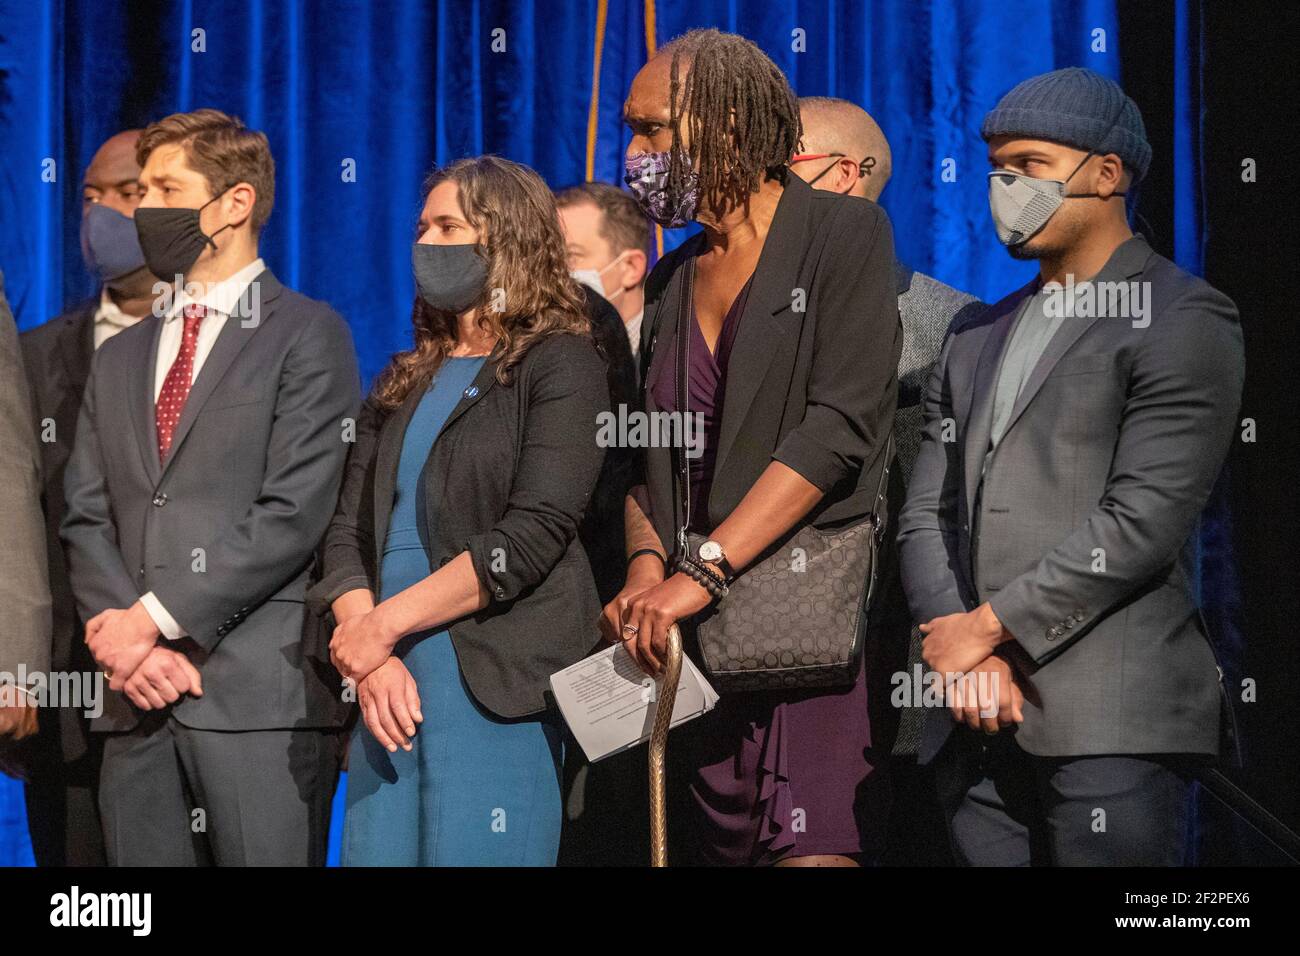 Minneapolis, Minnesota, USA. 12th Mar, 2021. Minneapolis City Council members, and Mayor Jacob Frey (red tie) listen to attorney Benjamin Crump speak dyring a press conference after the Minneapolis City Council approve a 27 million dollar settlement with the Floyd family. Credit: Chris Juhn/ZUMA Wire/Alamy Live News Stock Photo